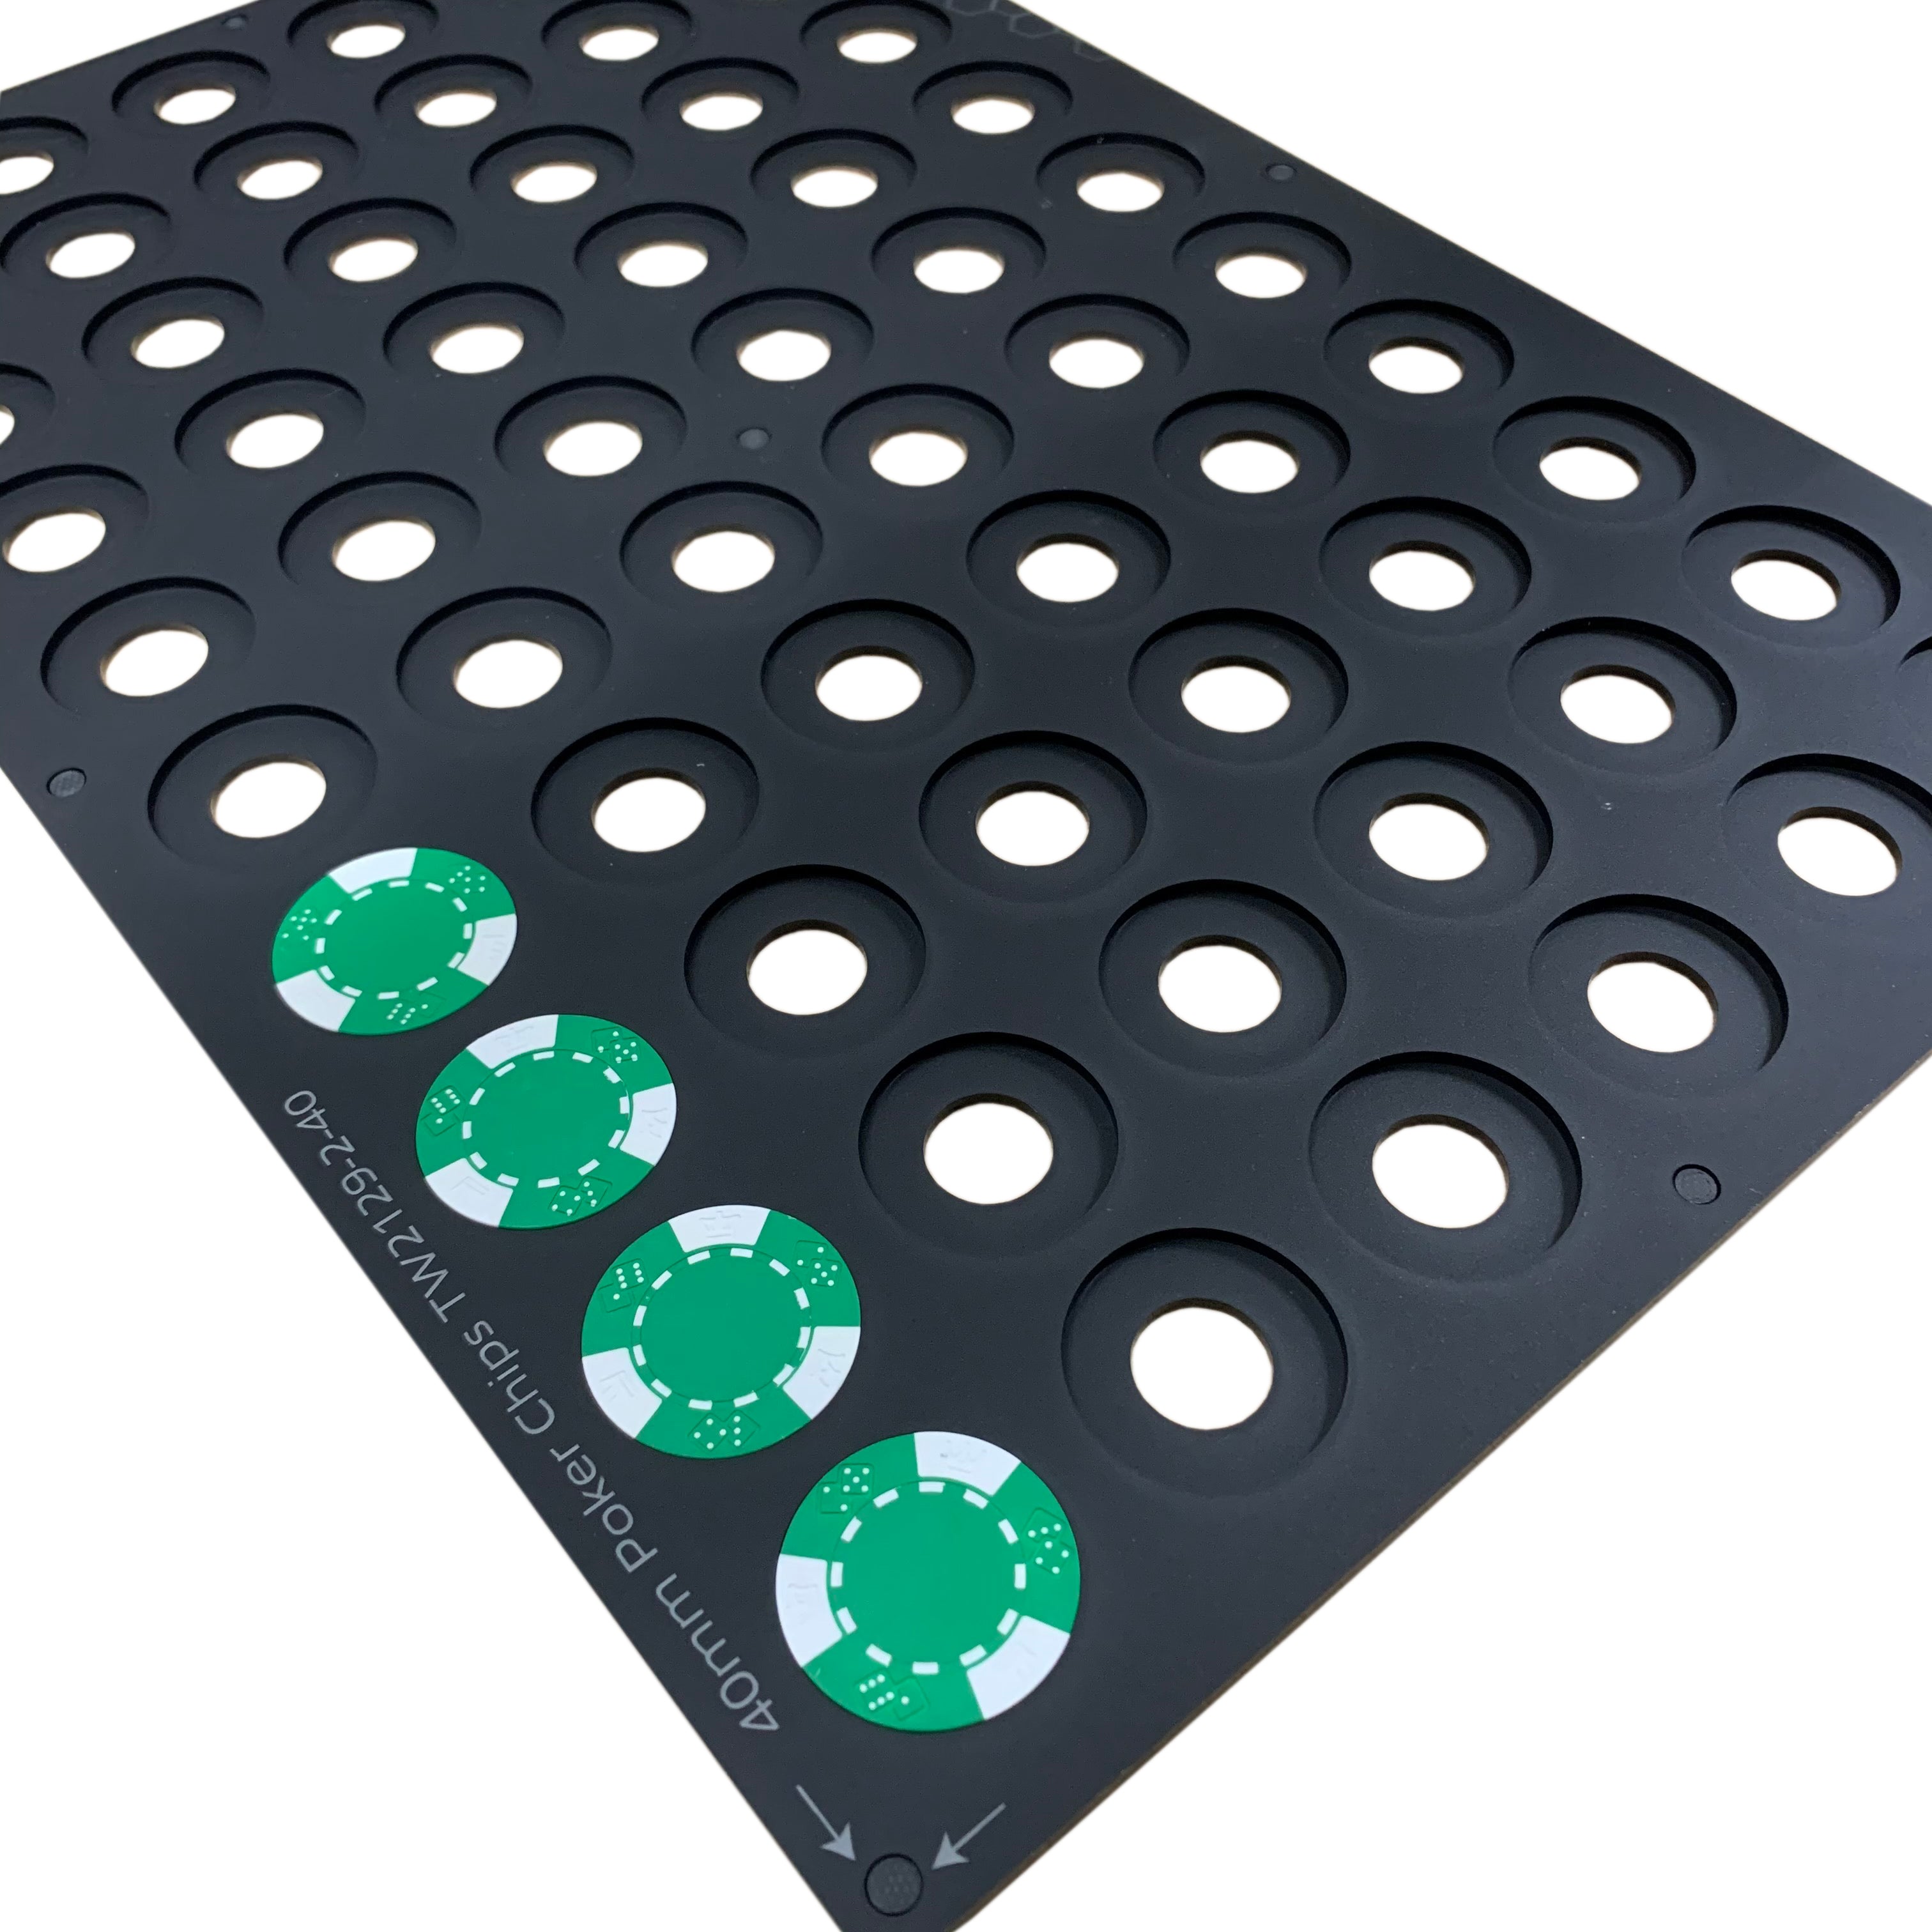 A4 Poker Chip Printing Jig for Printing 39mm / 40mm Poker Chips with an A4 Flatbed Printers